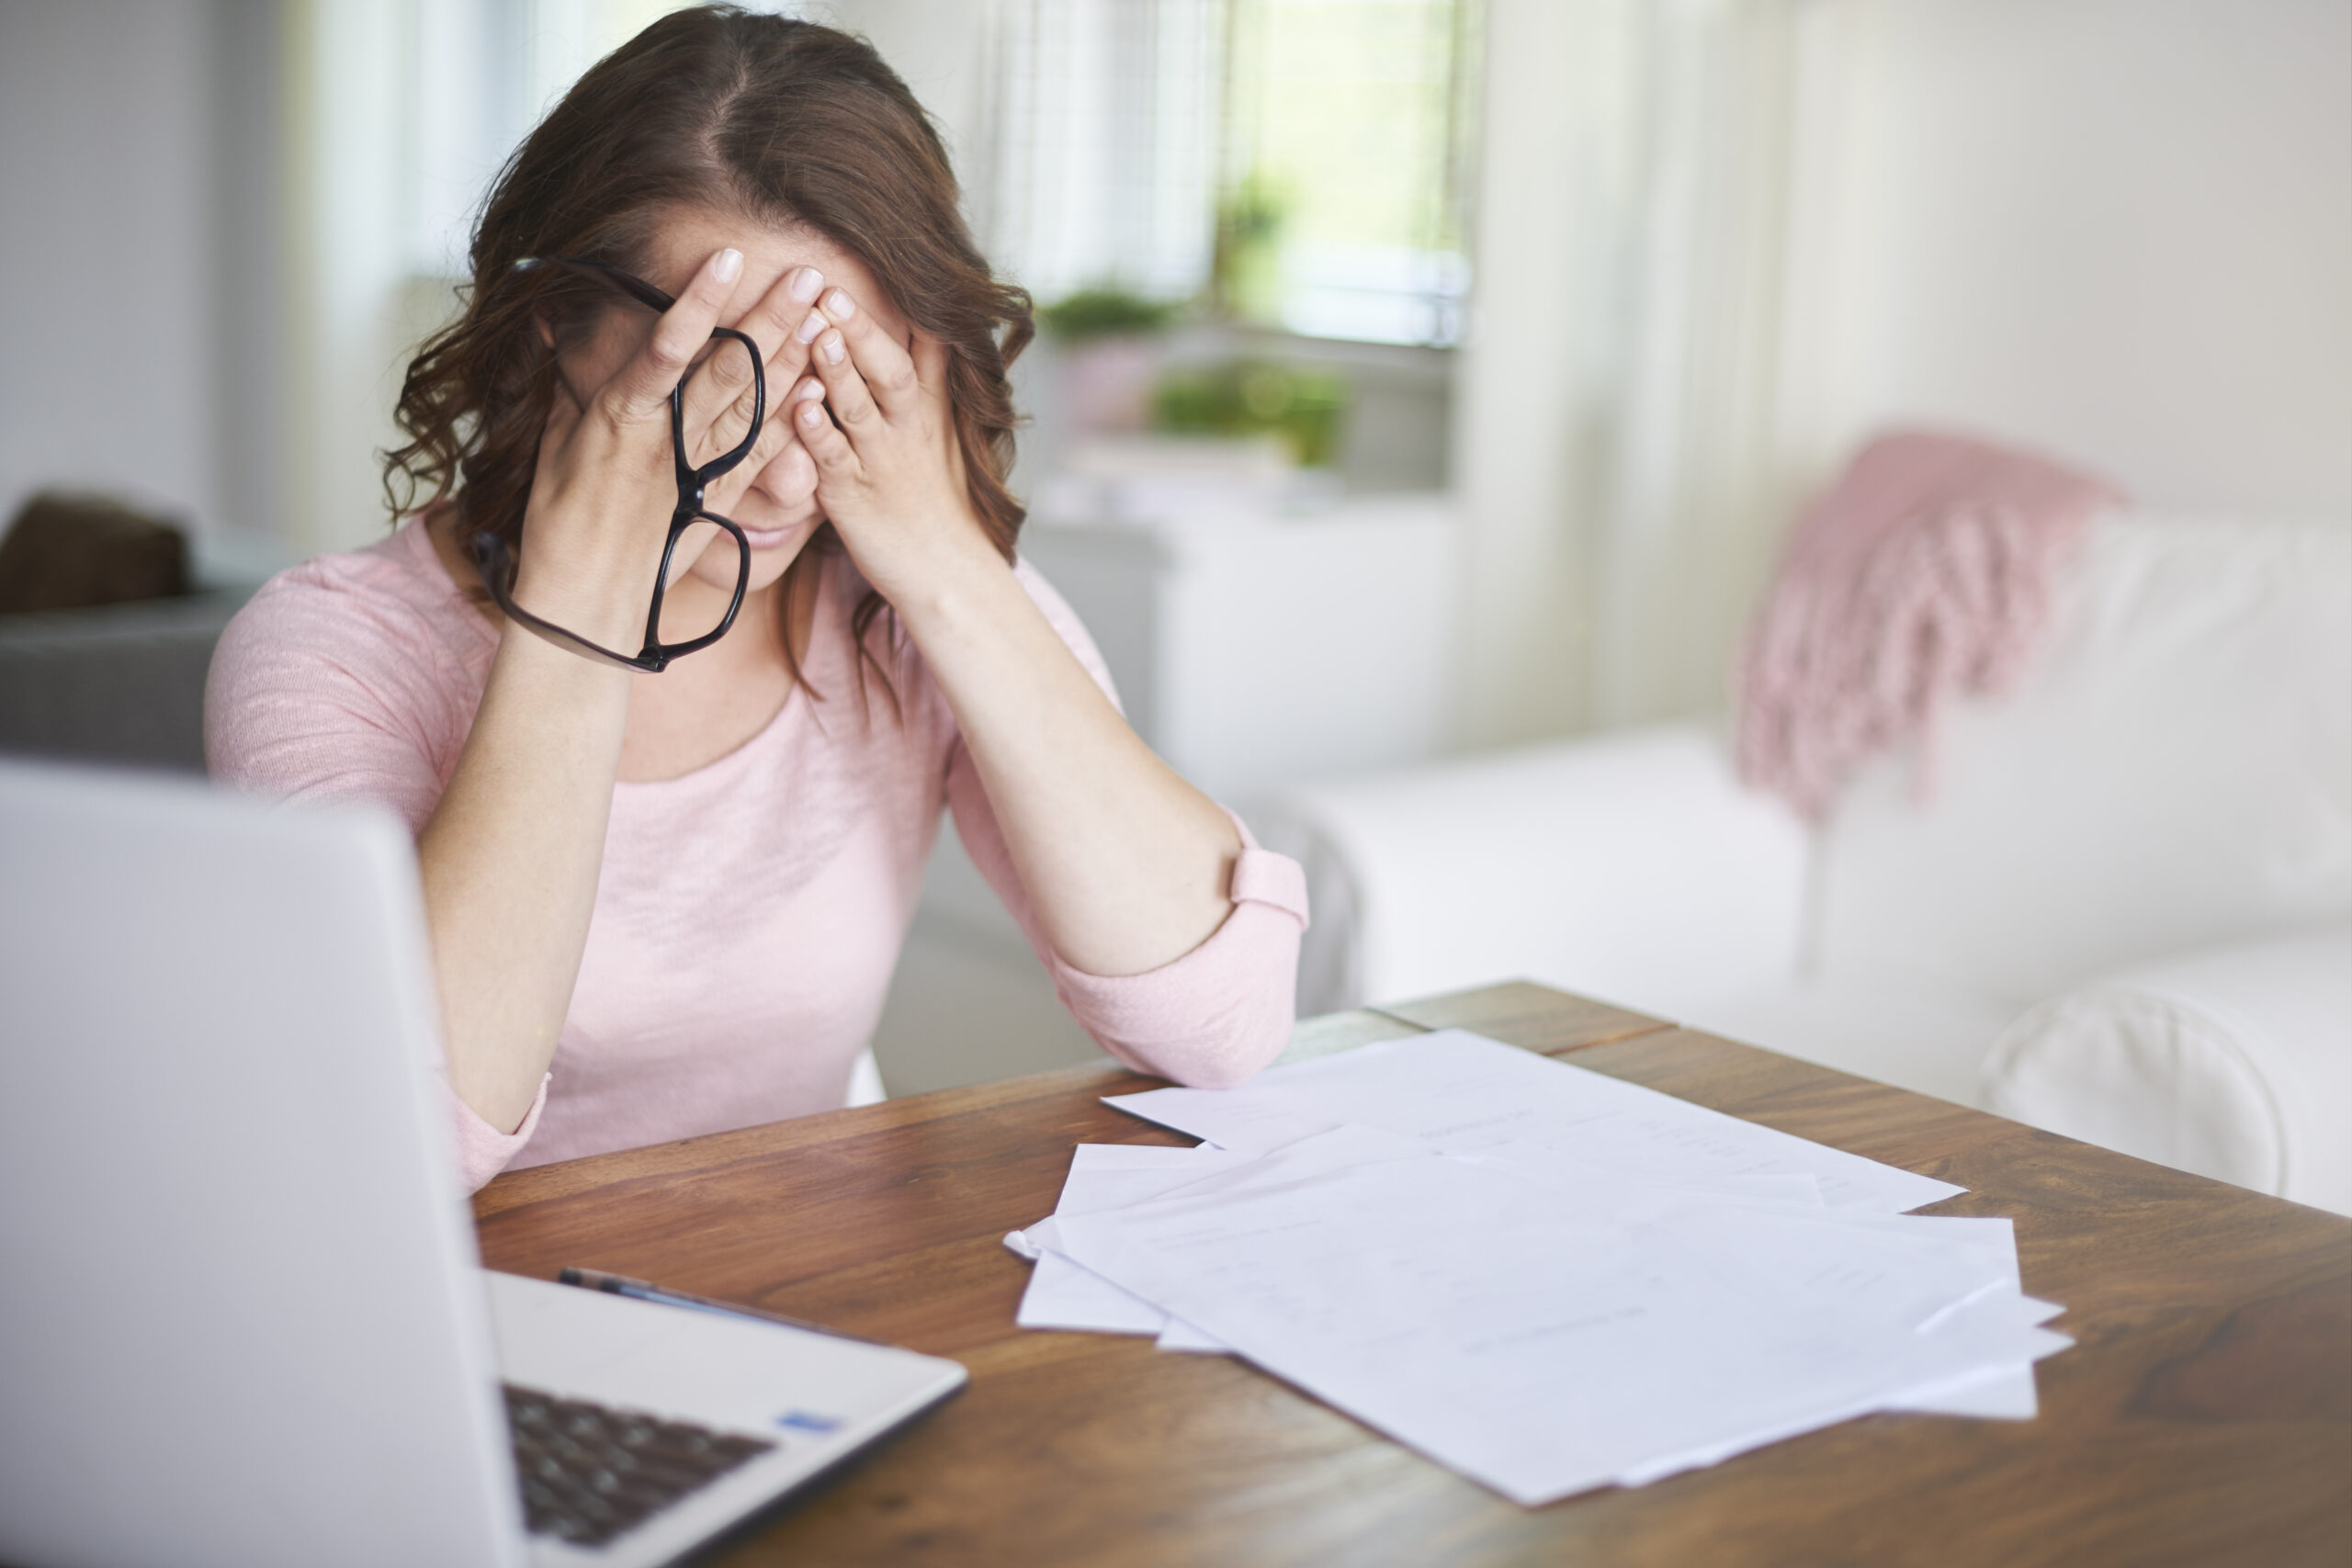 Woman feeling very stressed at her desk, laptop and paperwork in front of her